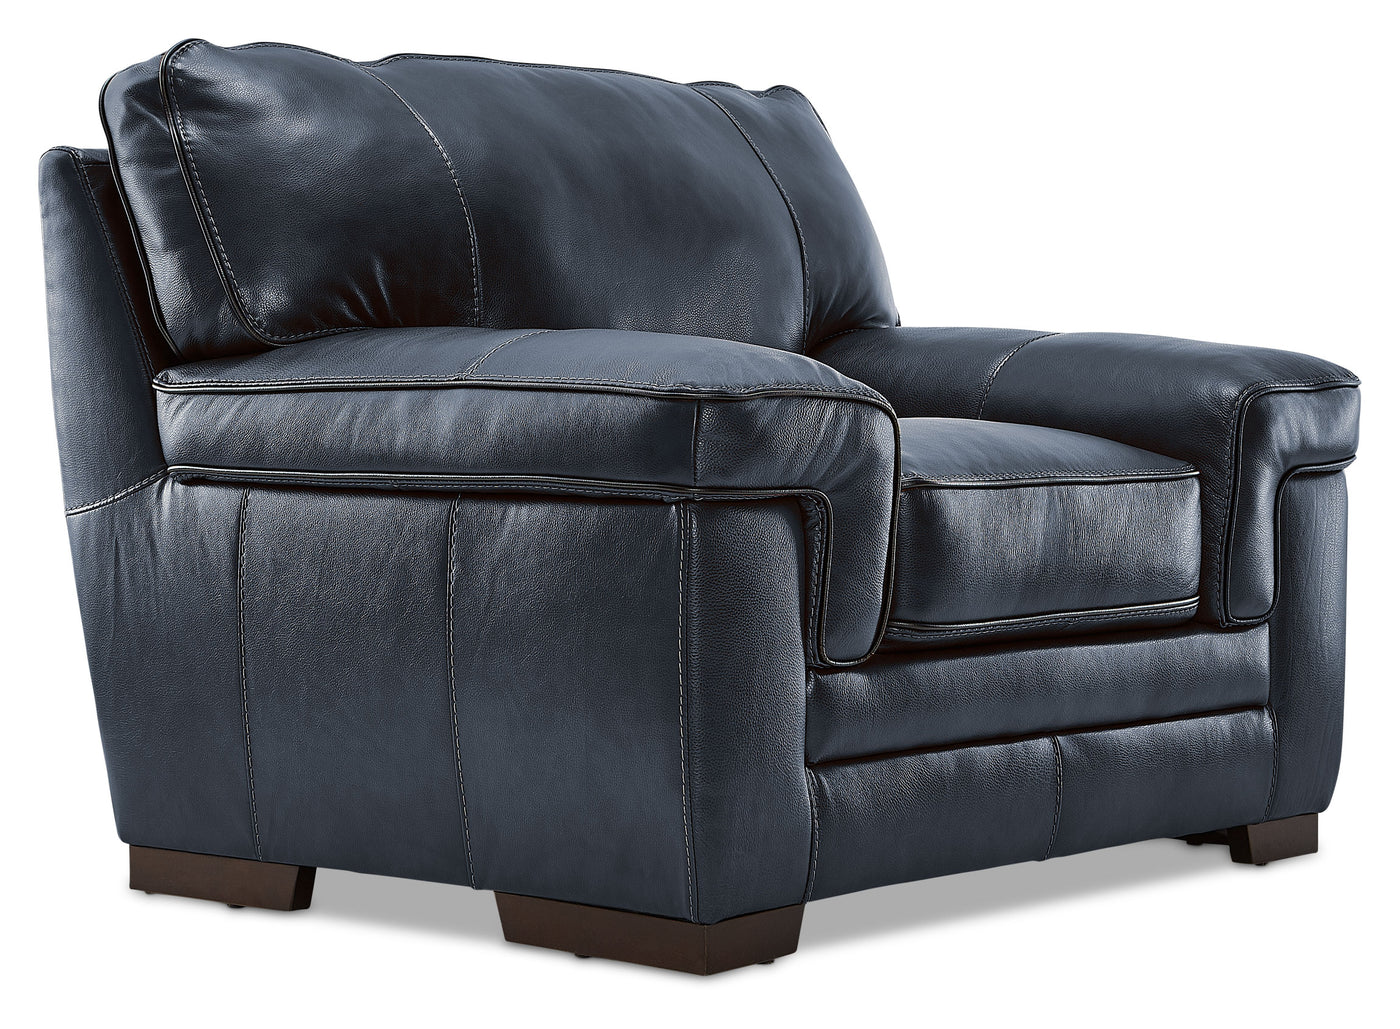 Stampede Leather Sofa and Chair Set - Cobalt